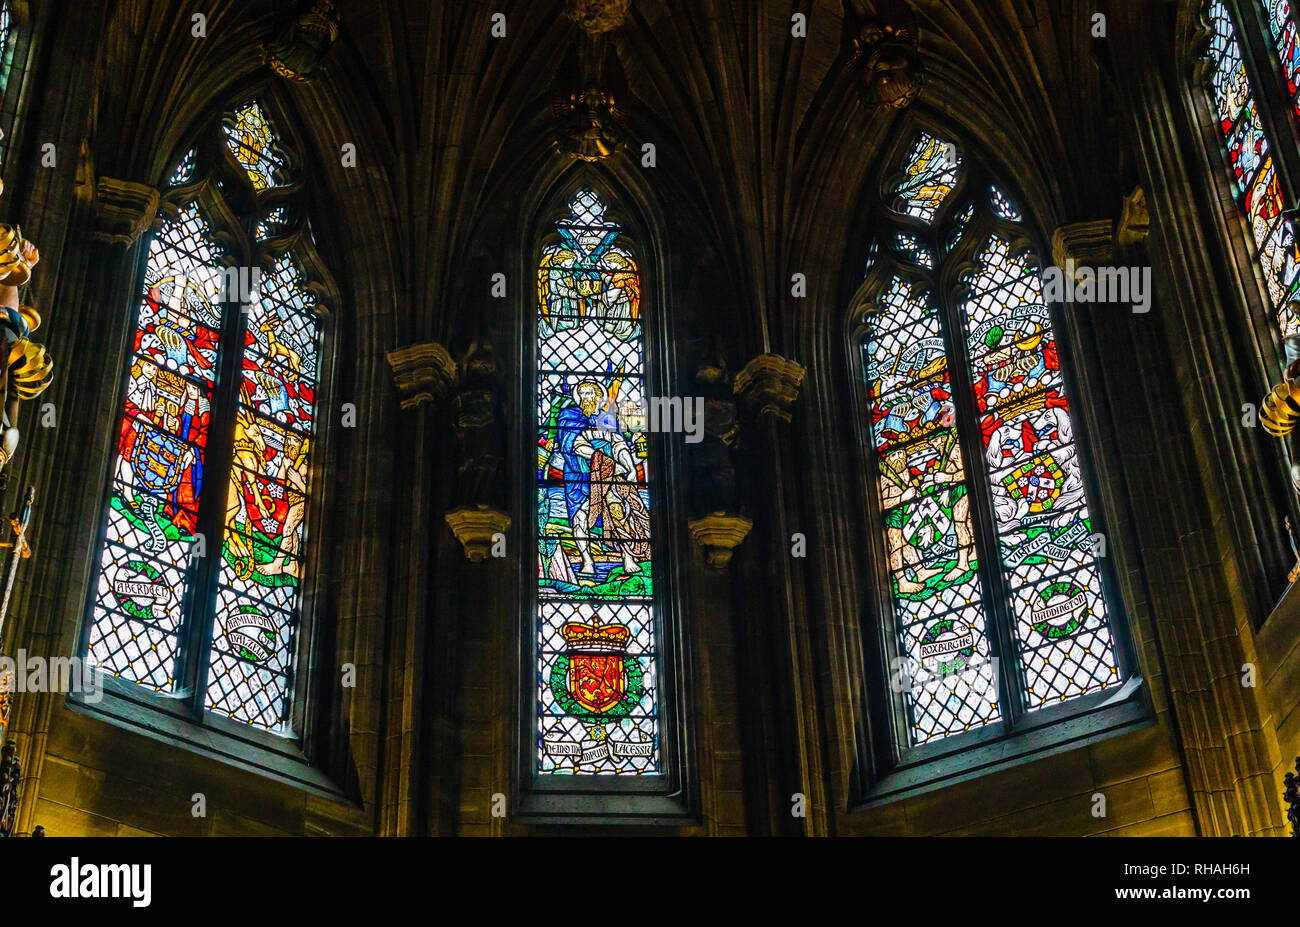 Edinburgh, Scotland - August  26, 2018: Stained glass windows in Thistle Chapel in St Giles Cathedral aka High Kirk of Edinburgh, principal place of w Stock Photo